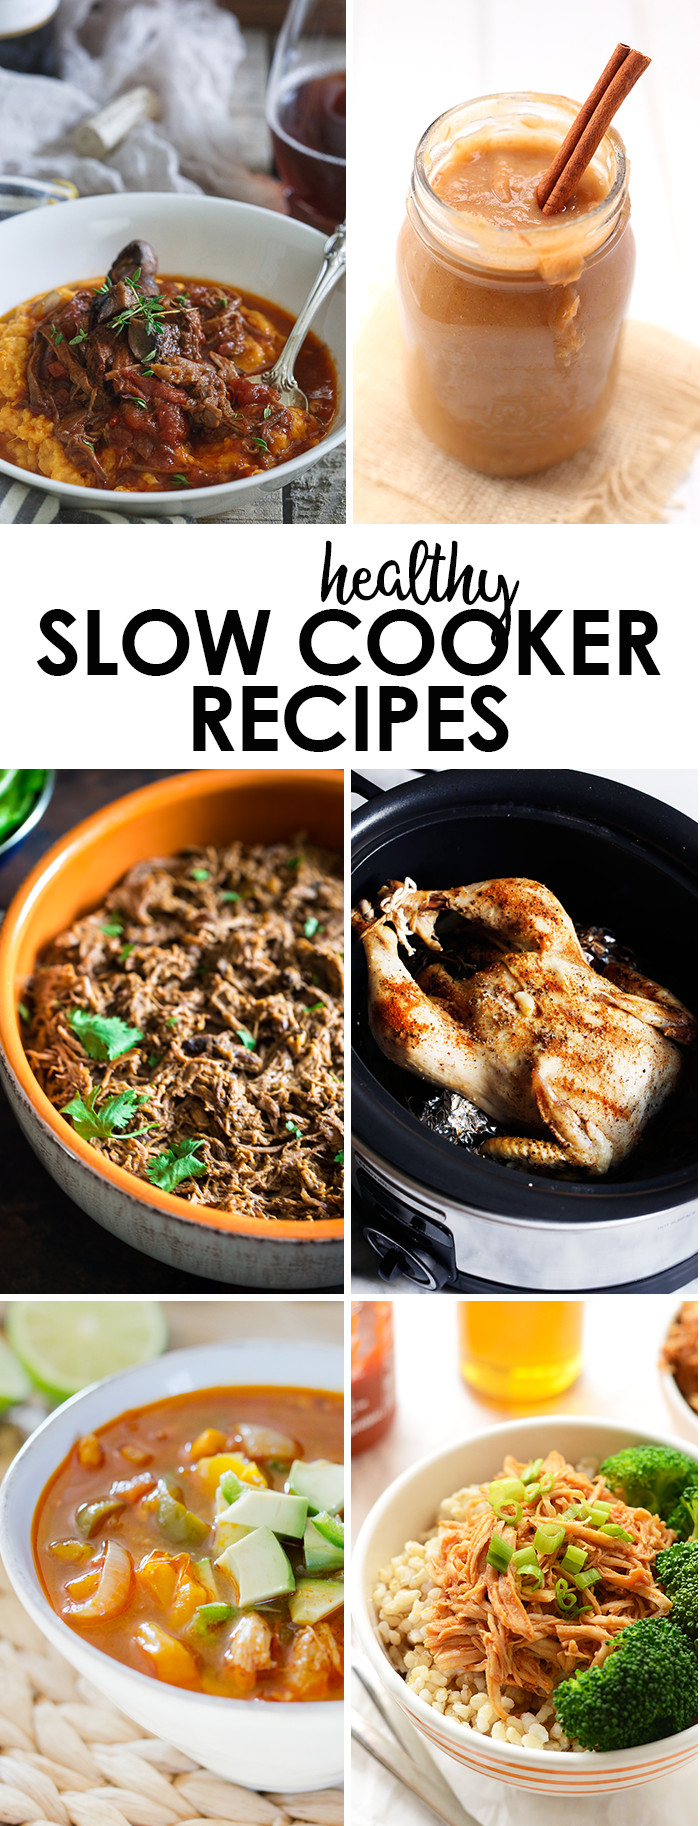 Slow Cooker Chicken Recipes Healthy
 5 Ingre nt Honey Sriracha Slow Cooker Chicken Fit